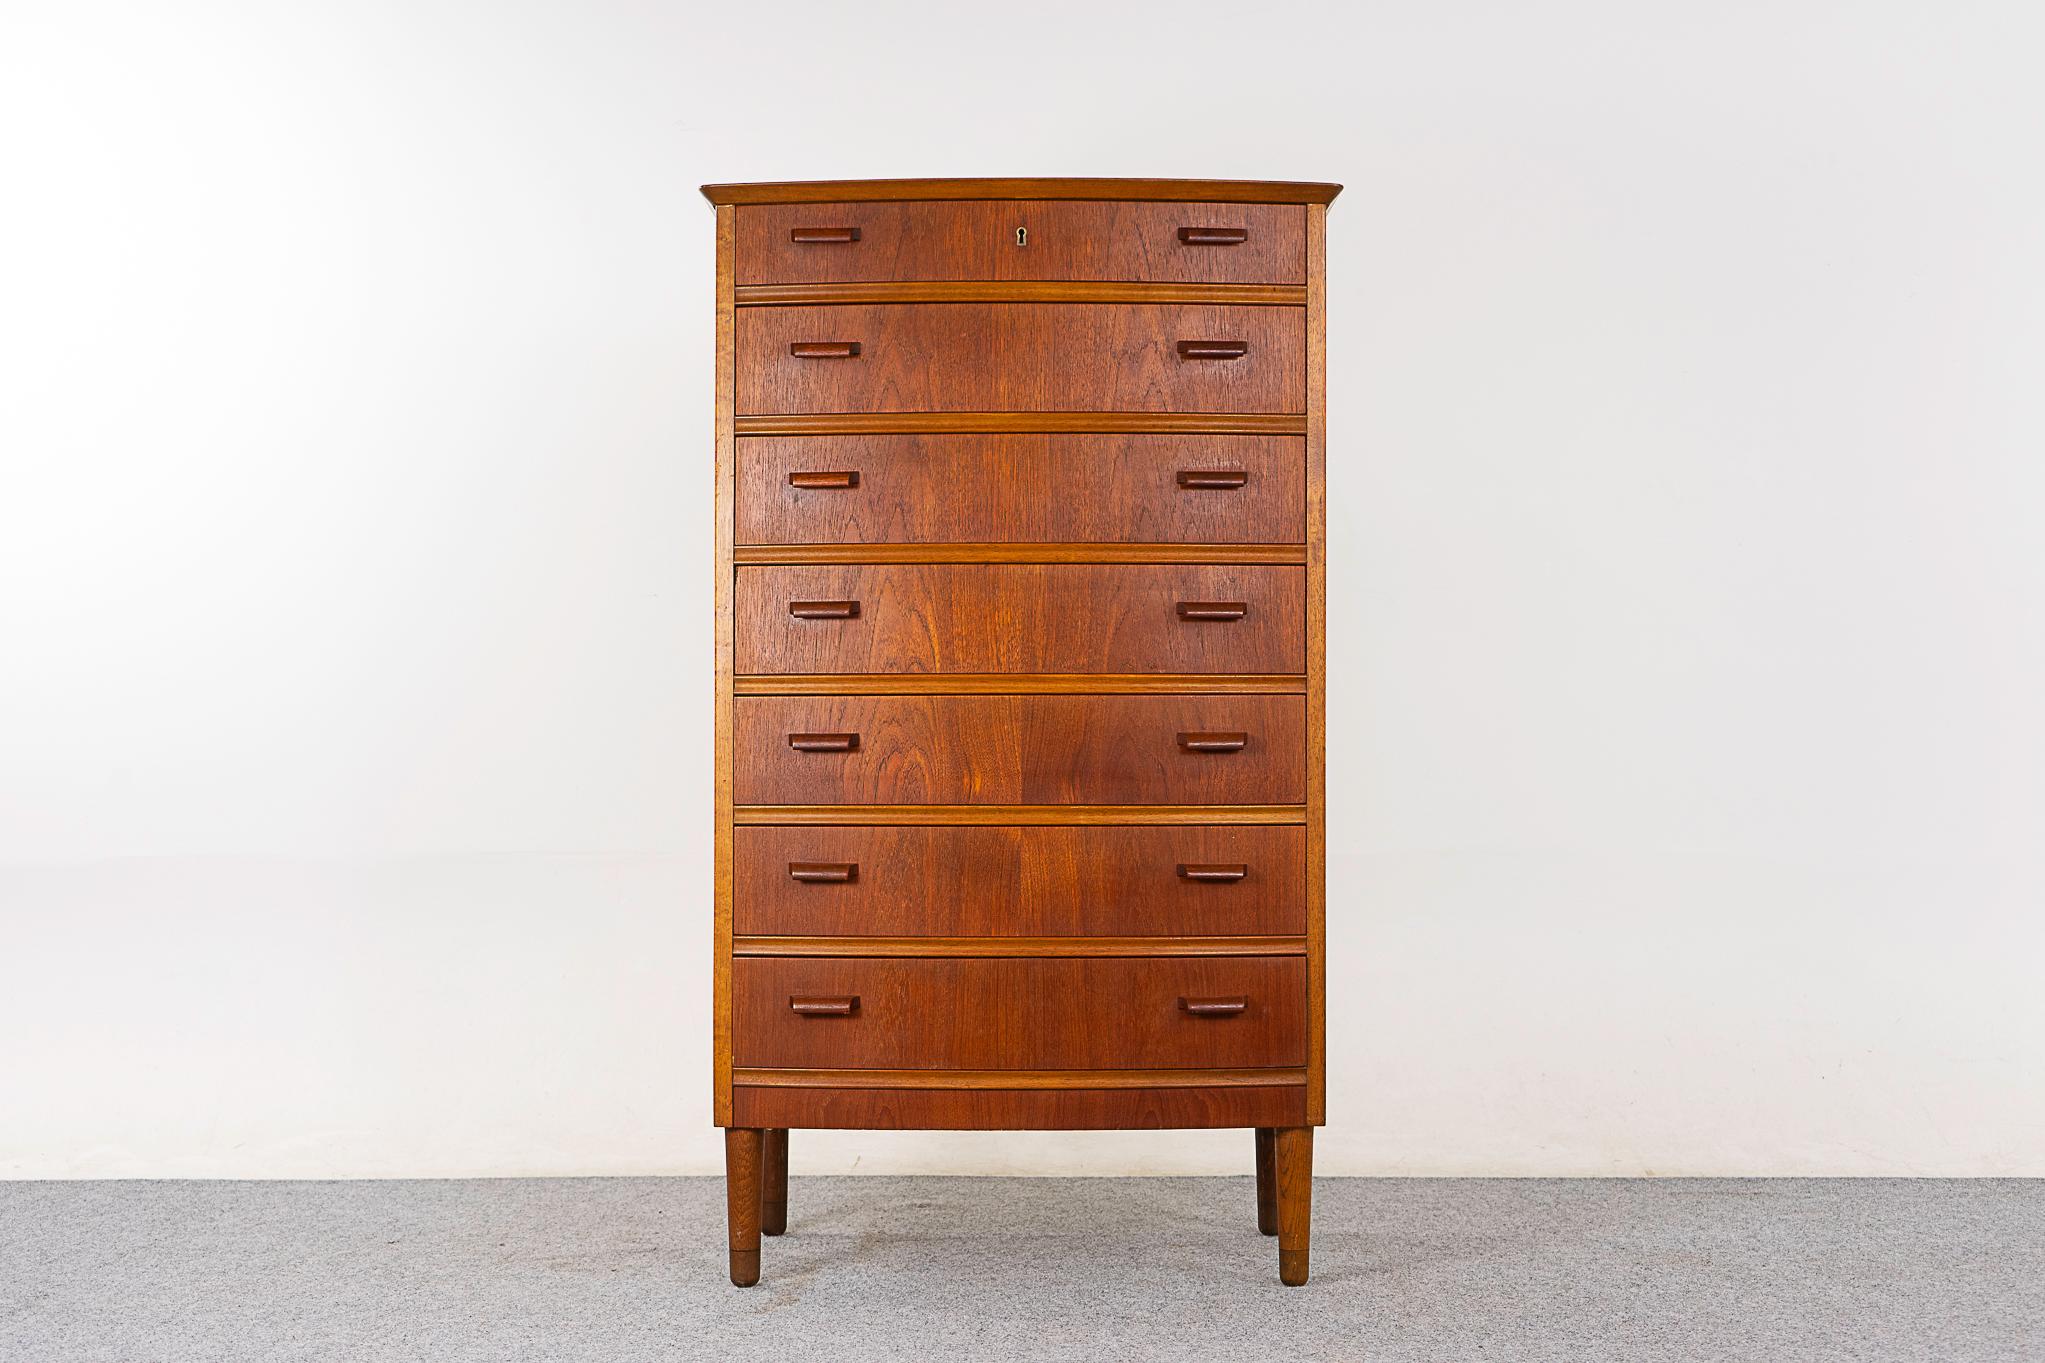 Teak Danish dresser, circa 1960's. Elegant gentle curved front with solid wood edging and stunning book-matched veneer drawer faces. 

Unrestored item with option to purchase in restored condition for an additional $200 USD. Restoration includes: